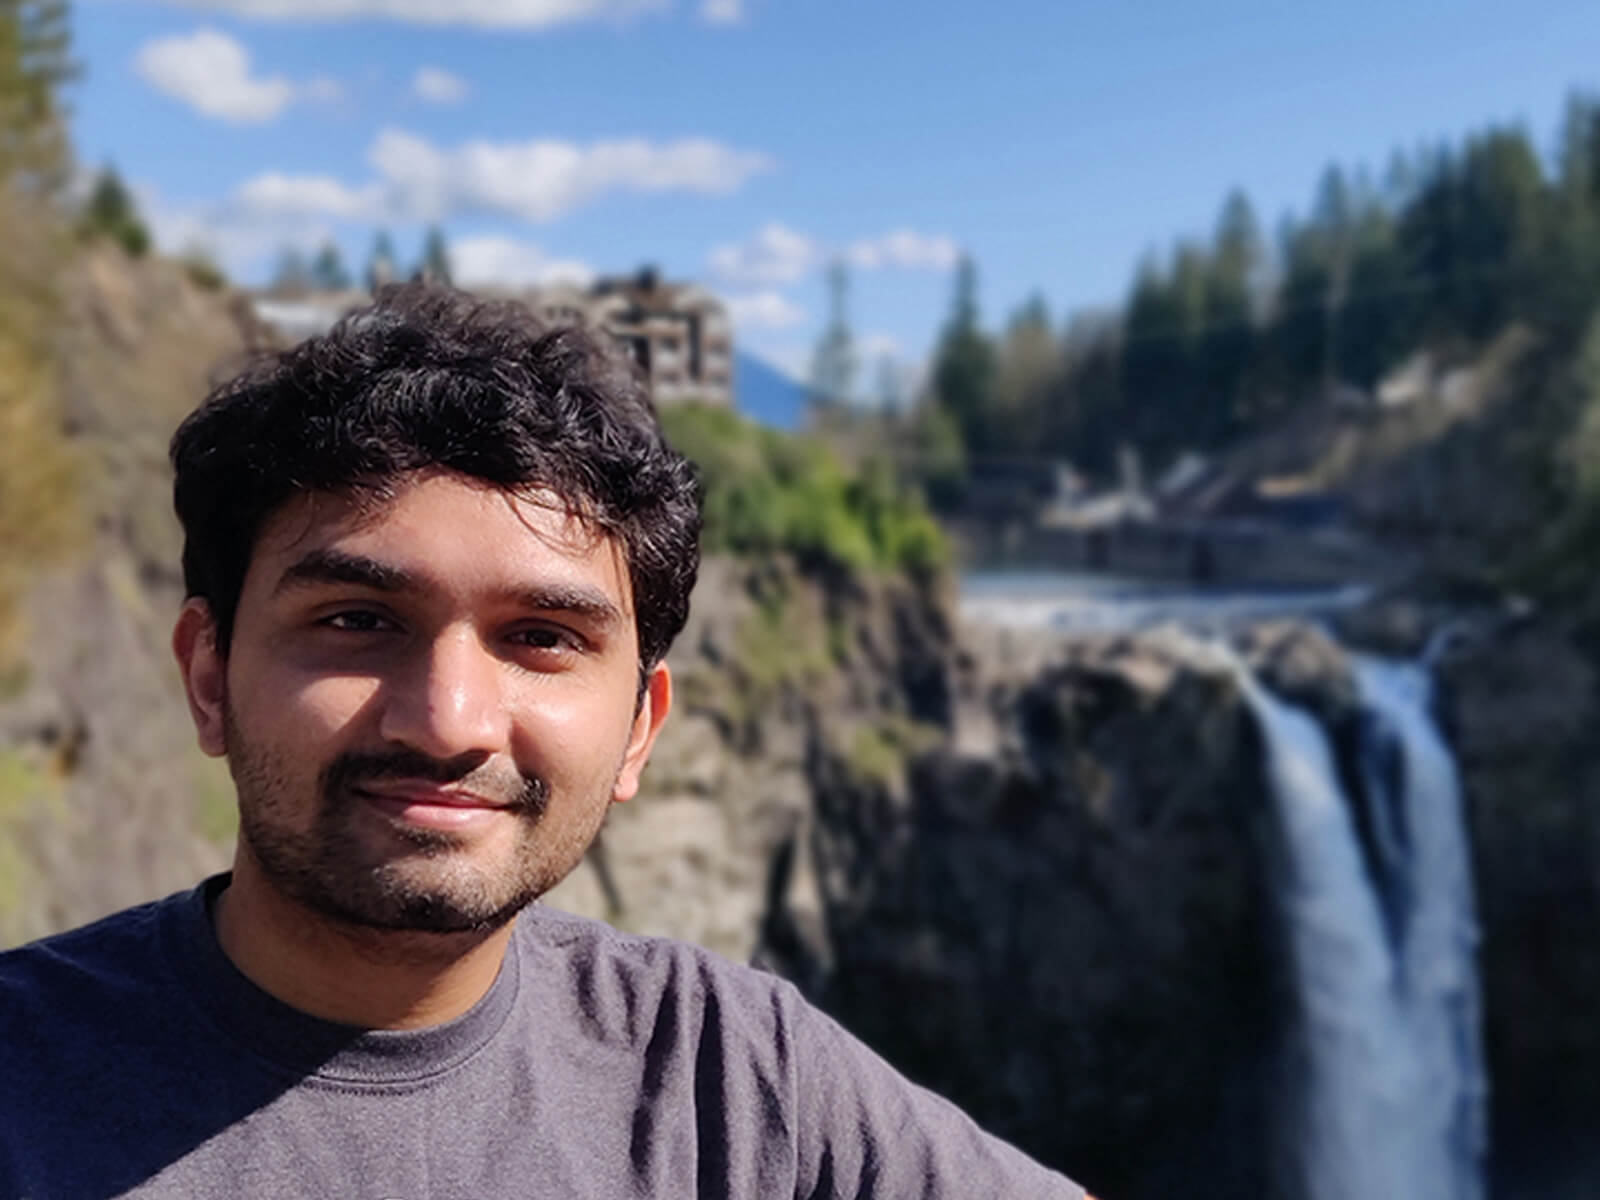 DigiPen MS in Computer Science graduate Dhrumil Shukla poses in front of Snoqualmie Falls